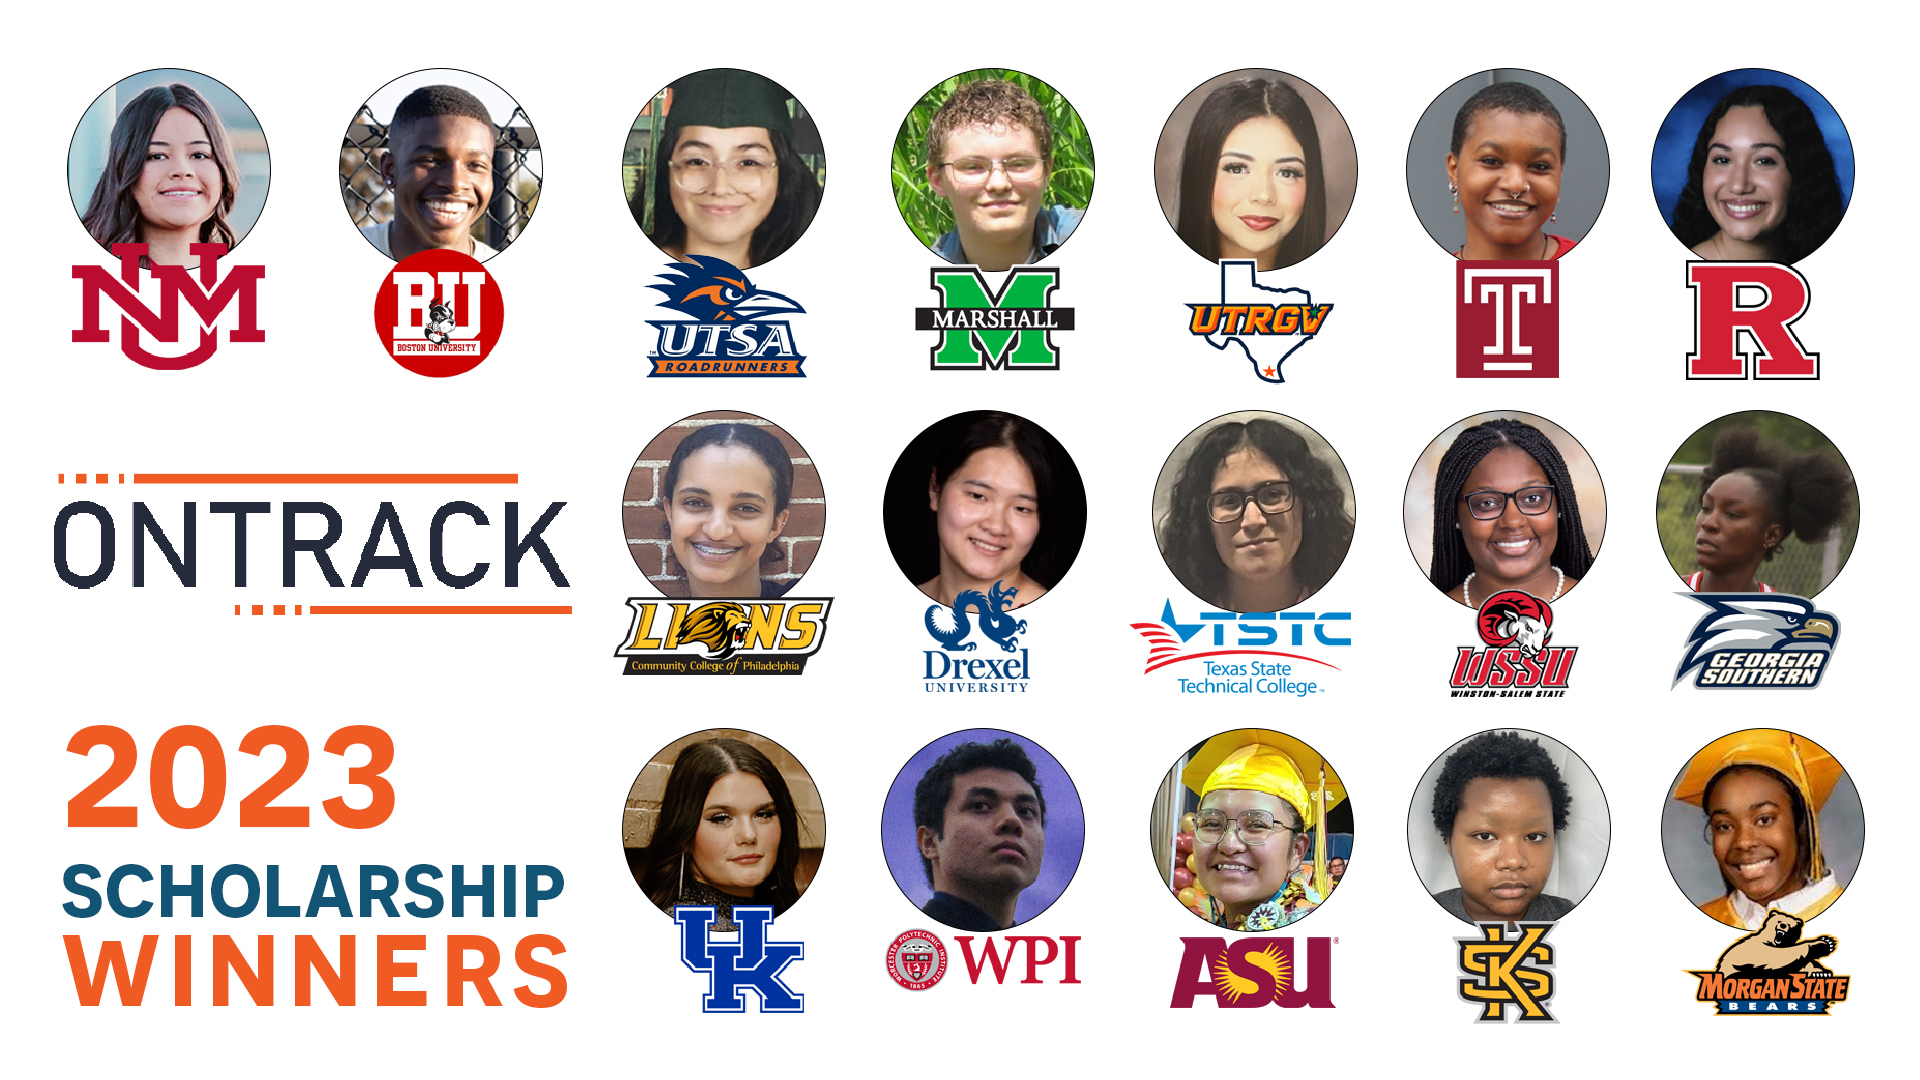 OnTrack Champions Education with $55,000 in Scholarships Awarded to High School Graduates Nationwide